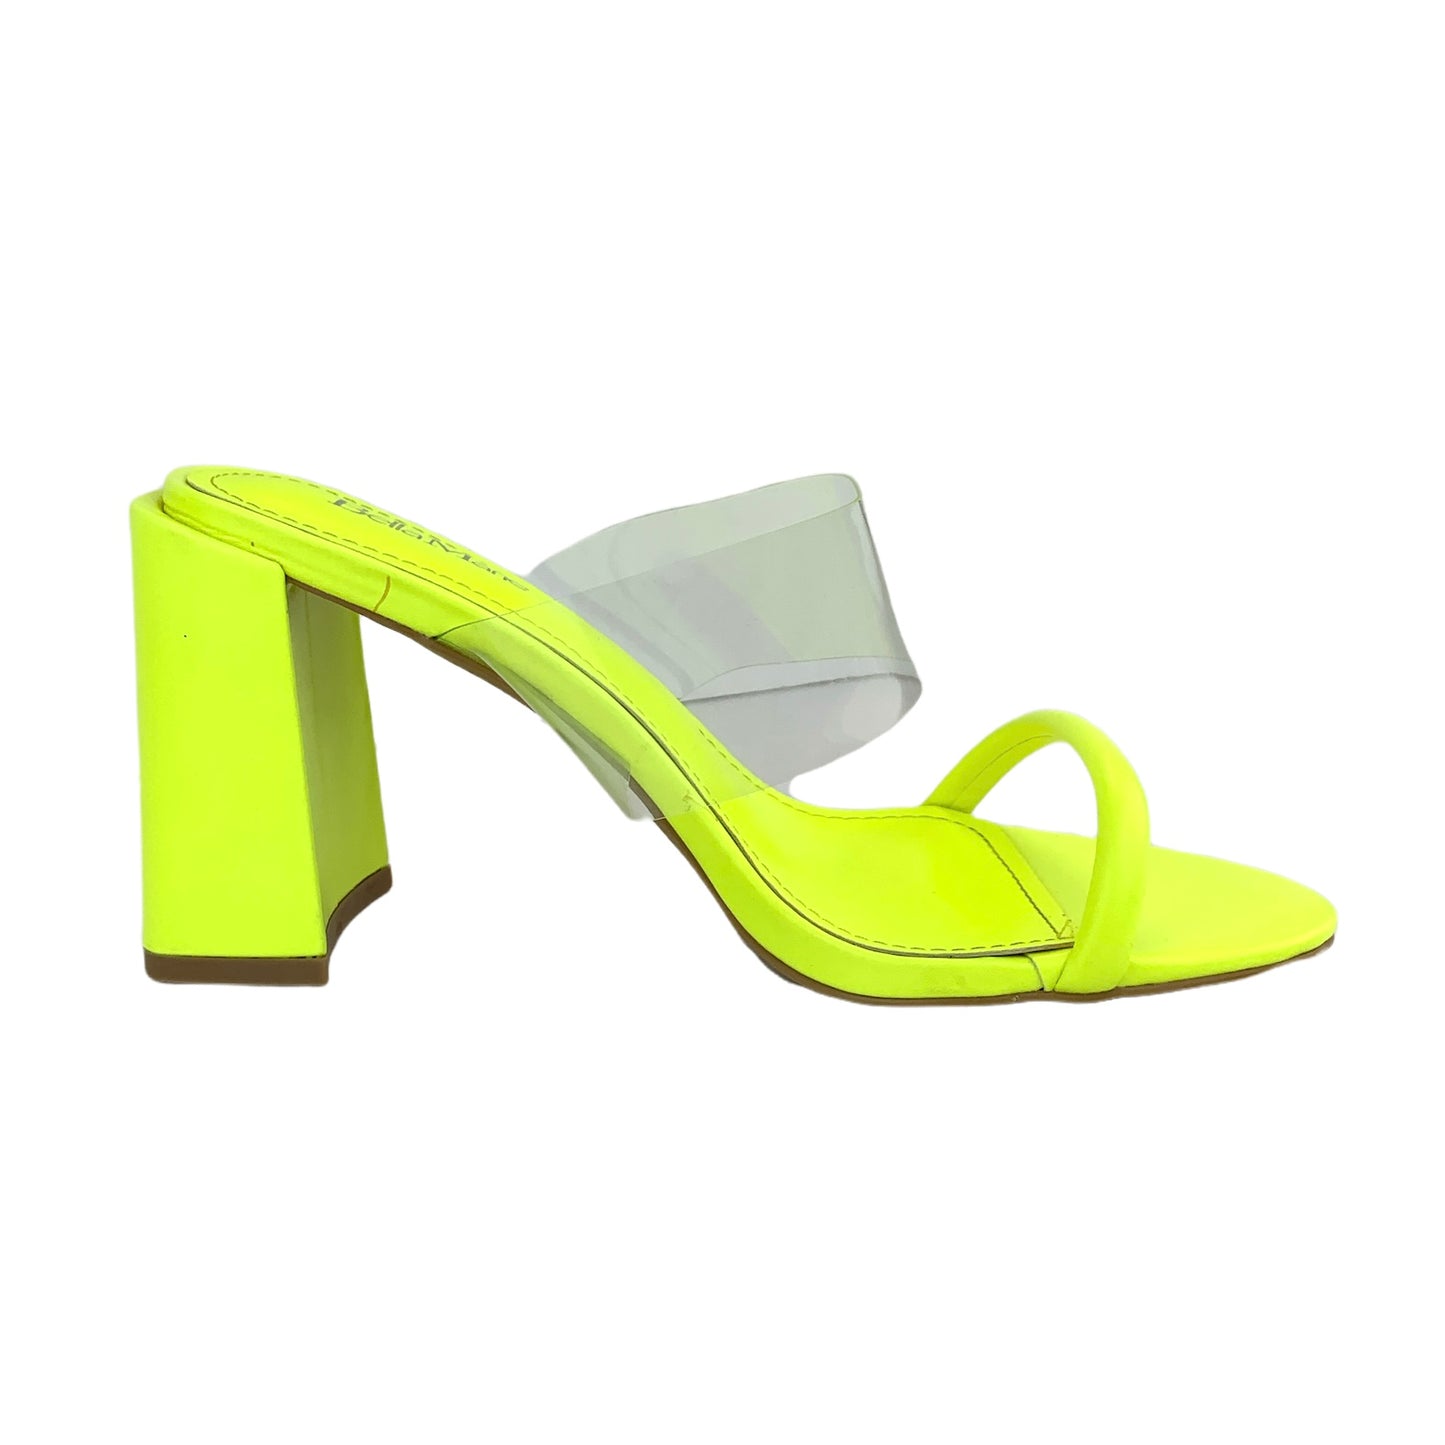 LOUNGE-1 Heeled Sandals Women's Shoes